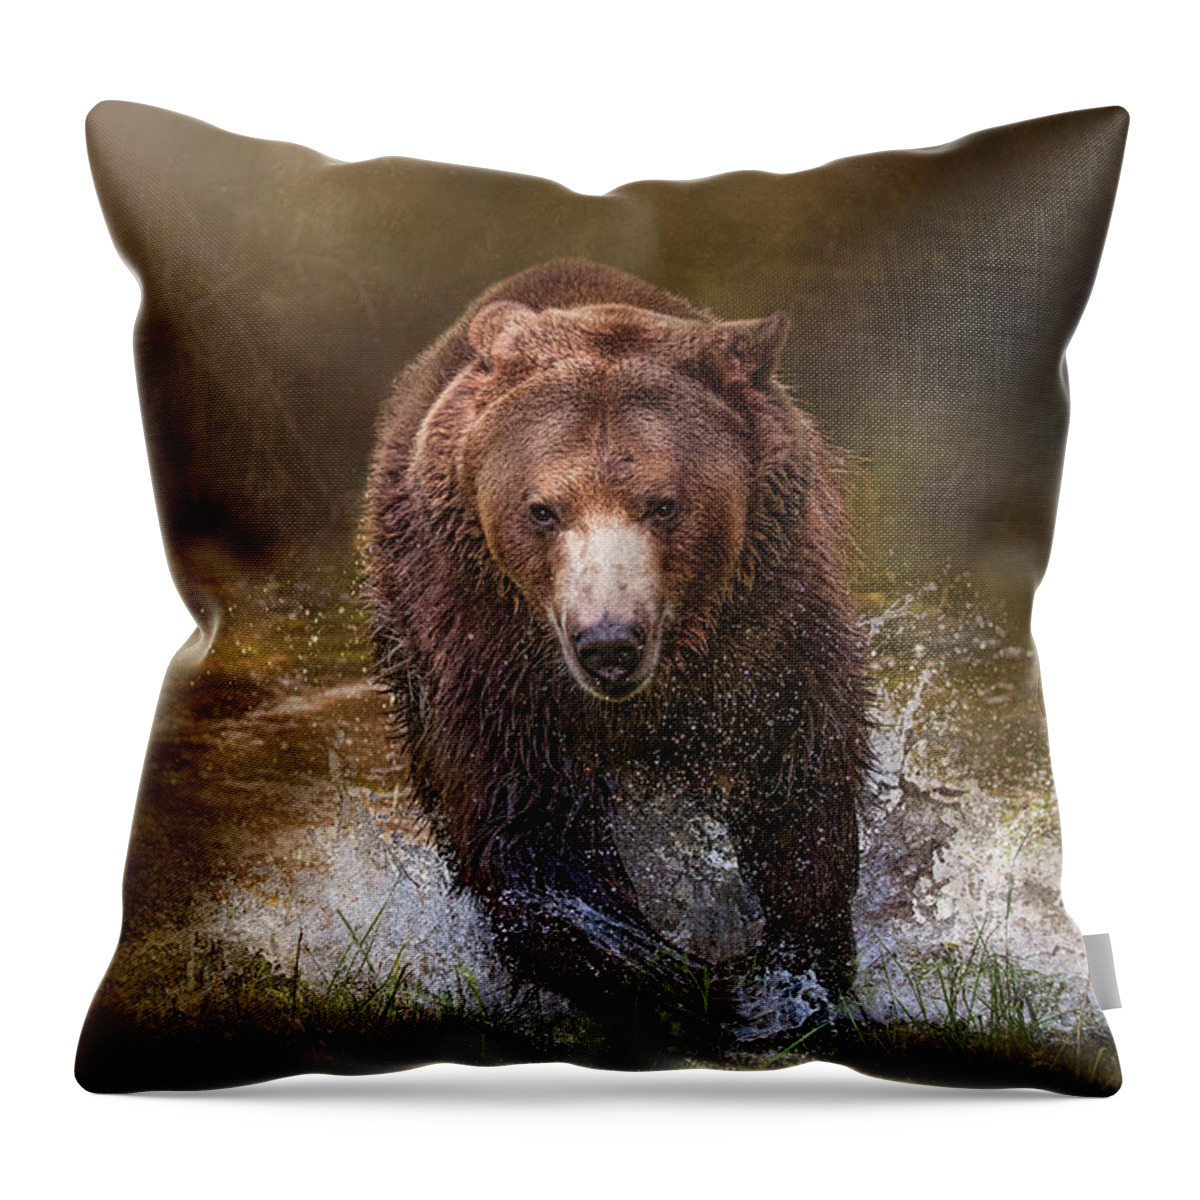 Grizzly Throw Pillow featuring the digital art Power of the Grizzly by Nicole Wilde